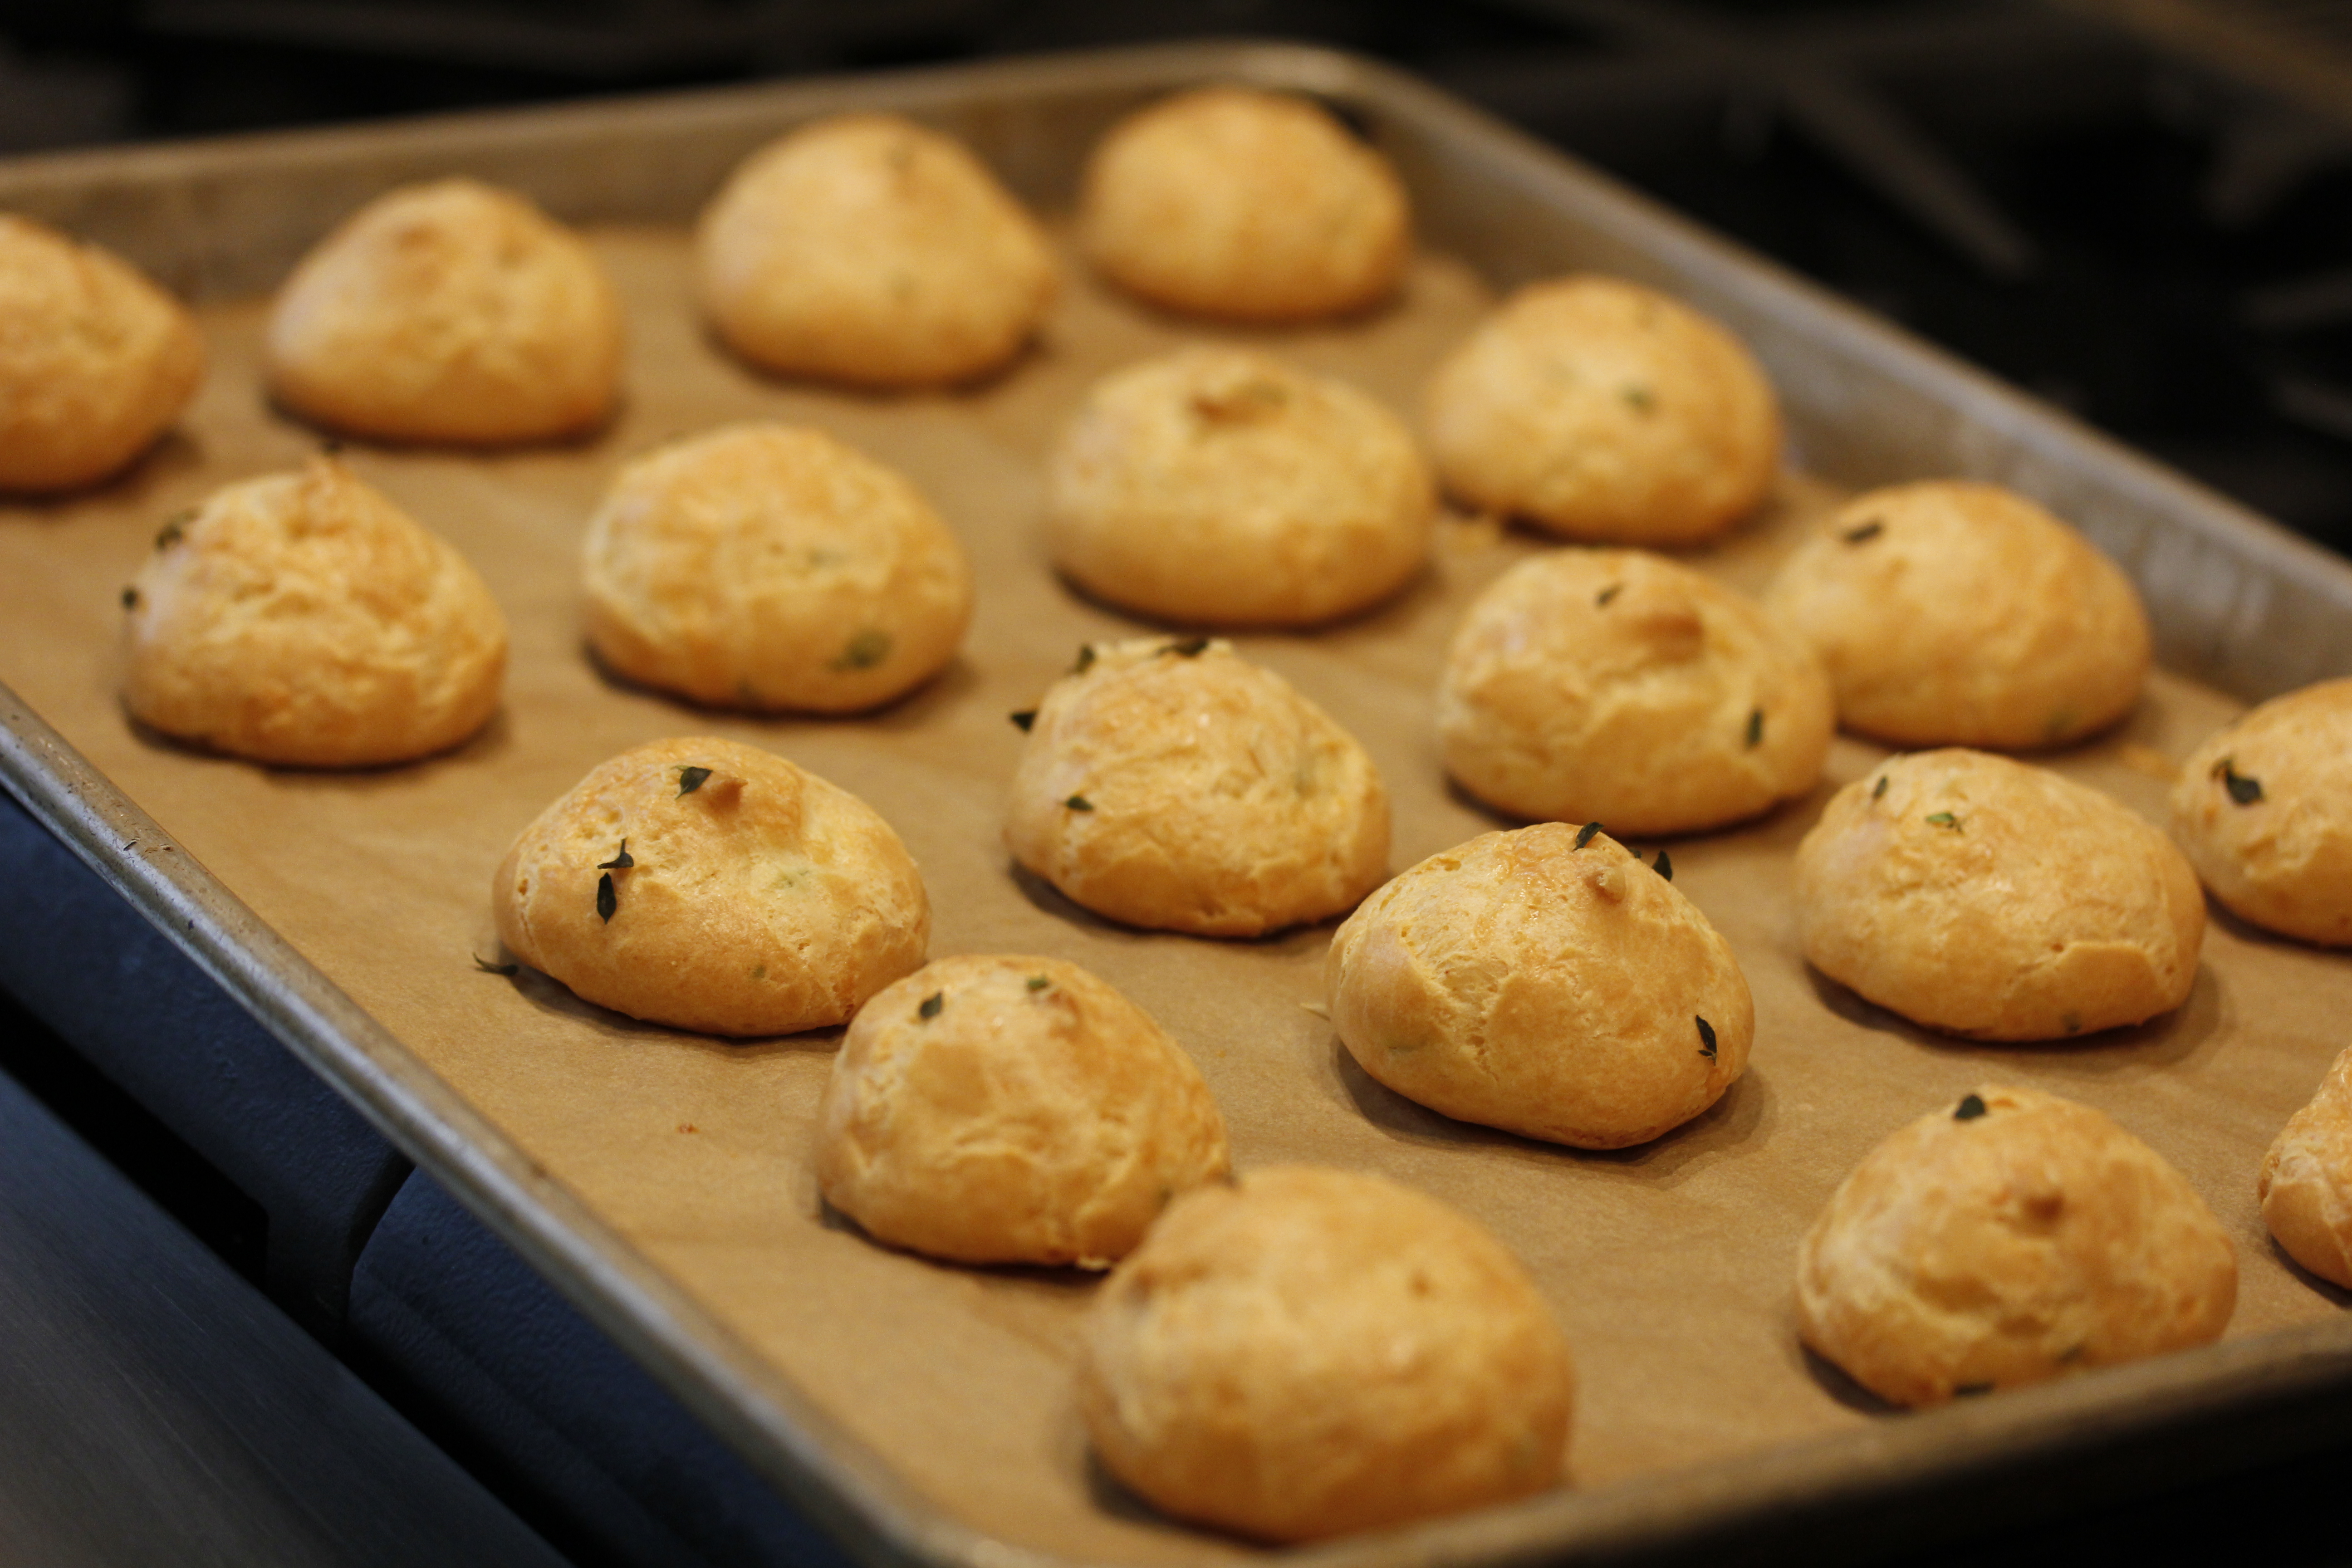 Cheddar Caraway Crisps and Thyme Gougeres